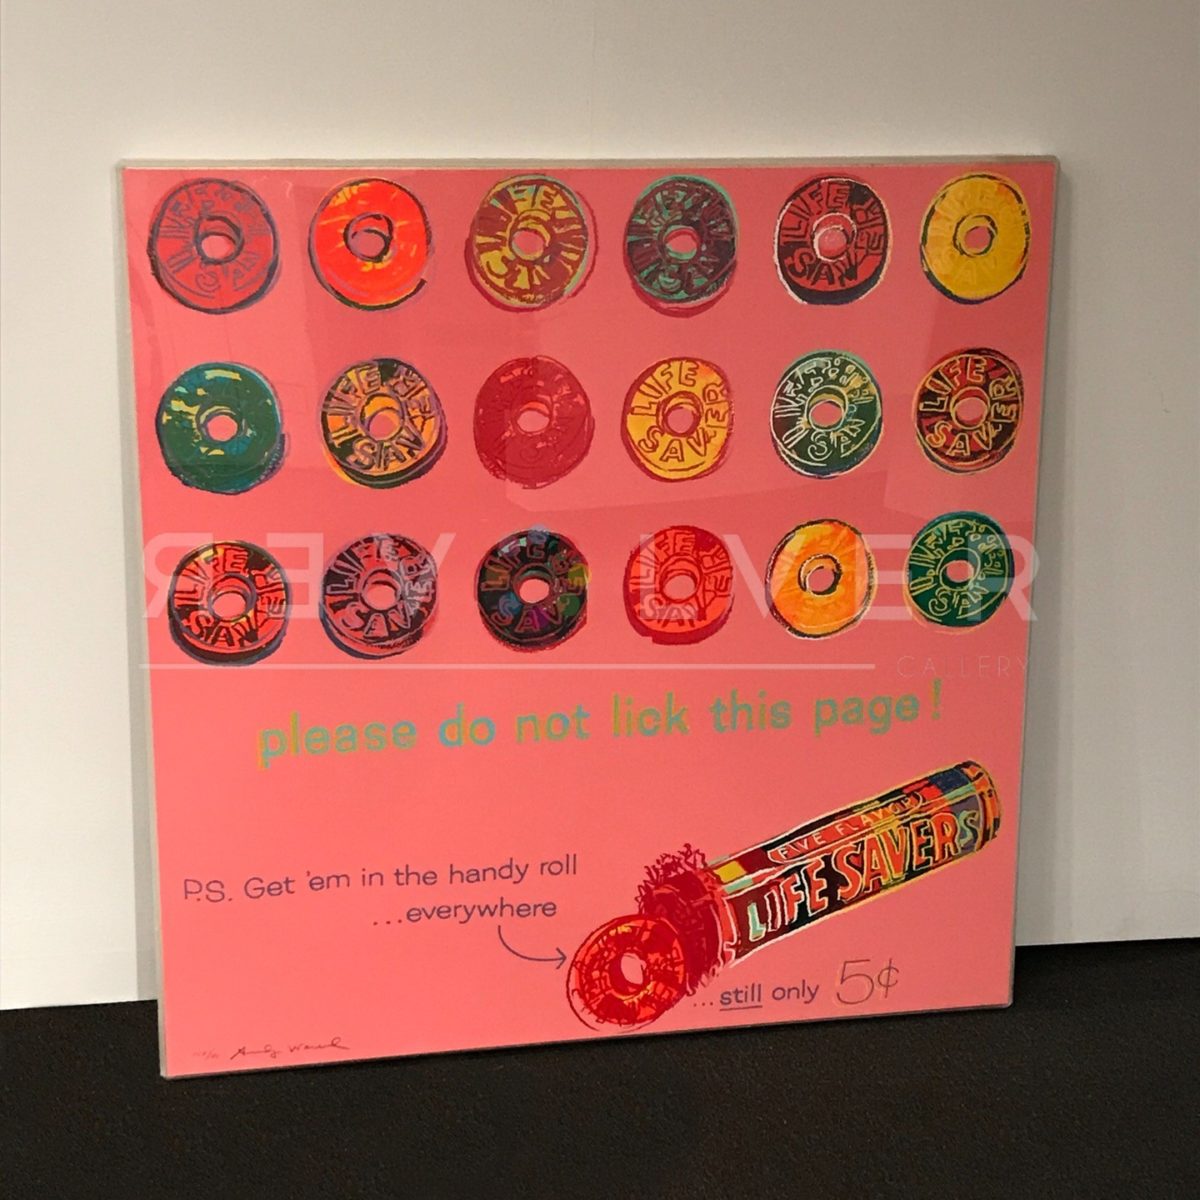 Andy Warhol Life Savers 353 screenprint from the Ads series in frame and sitting against the wall.